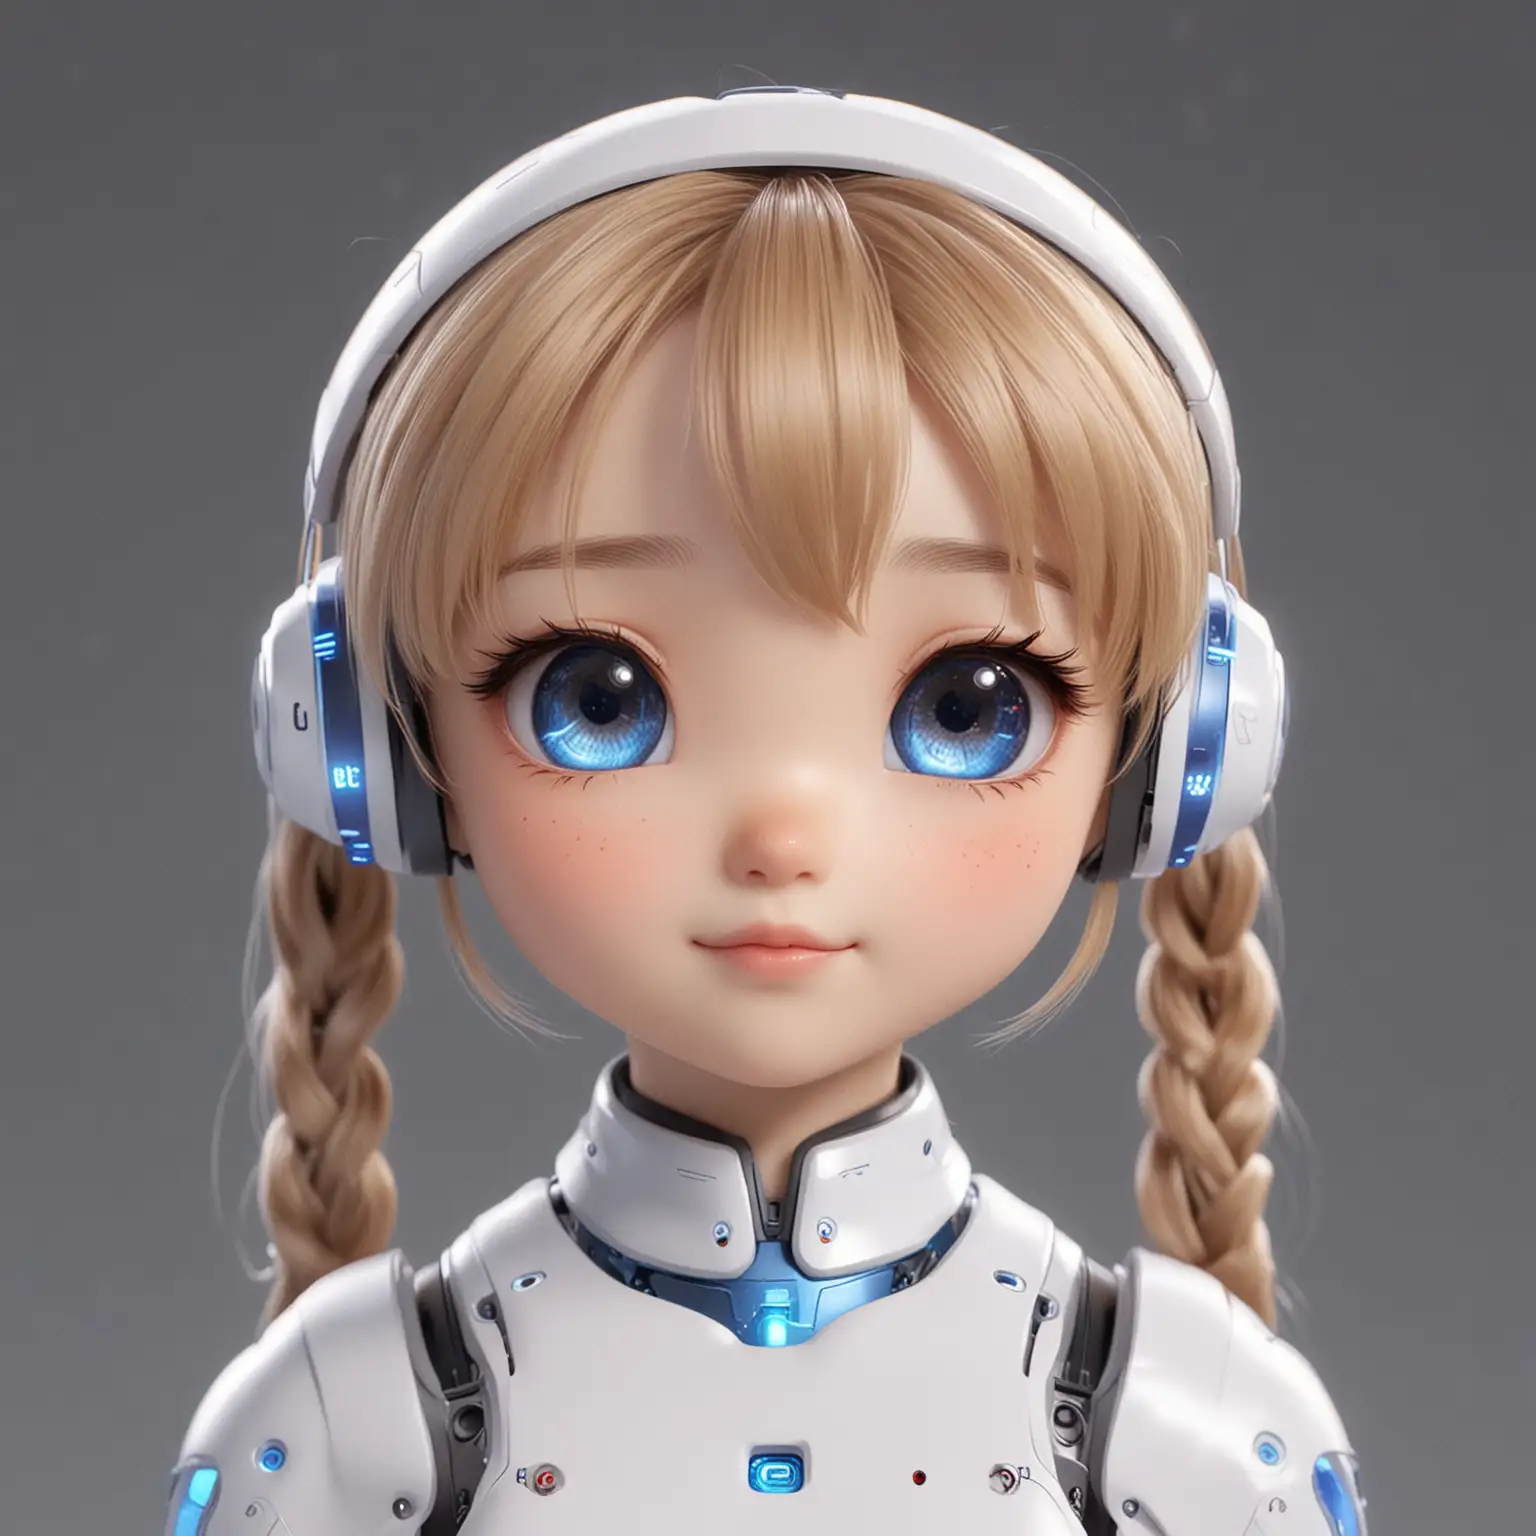 Adorable AI Robot with Endearing Expression